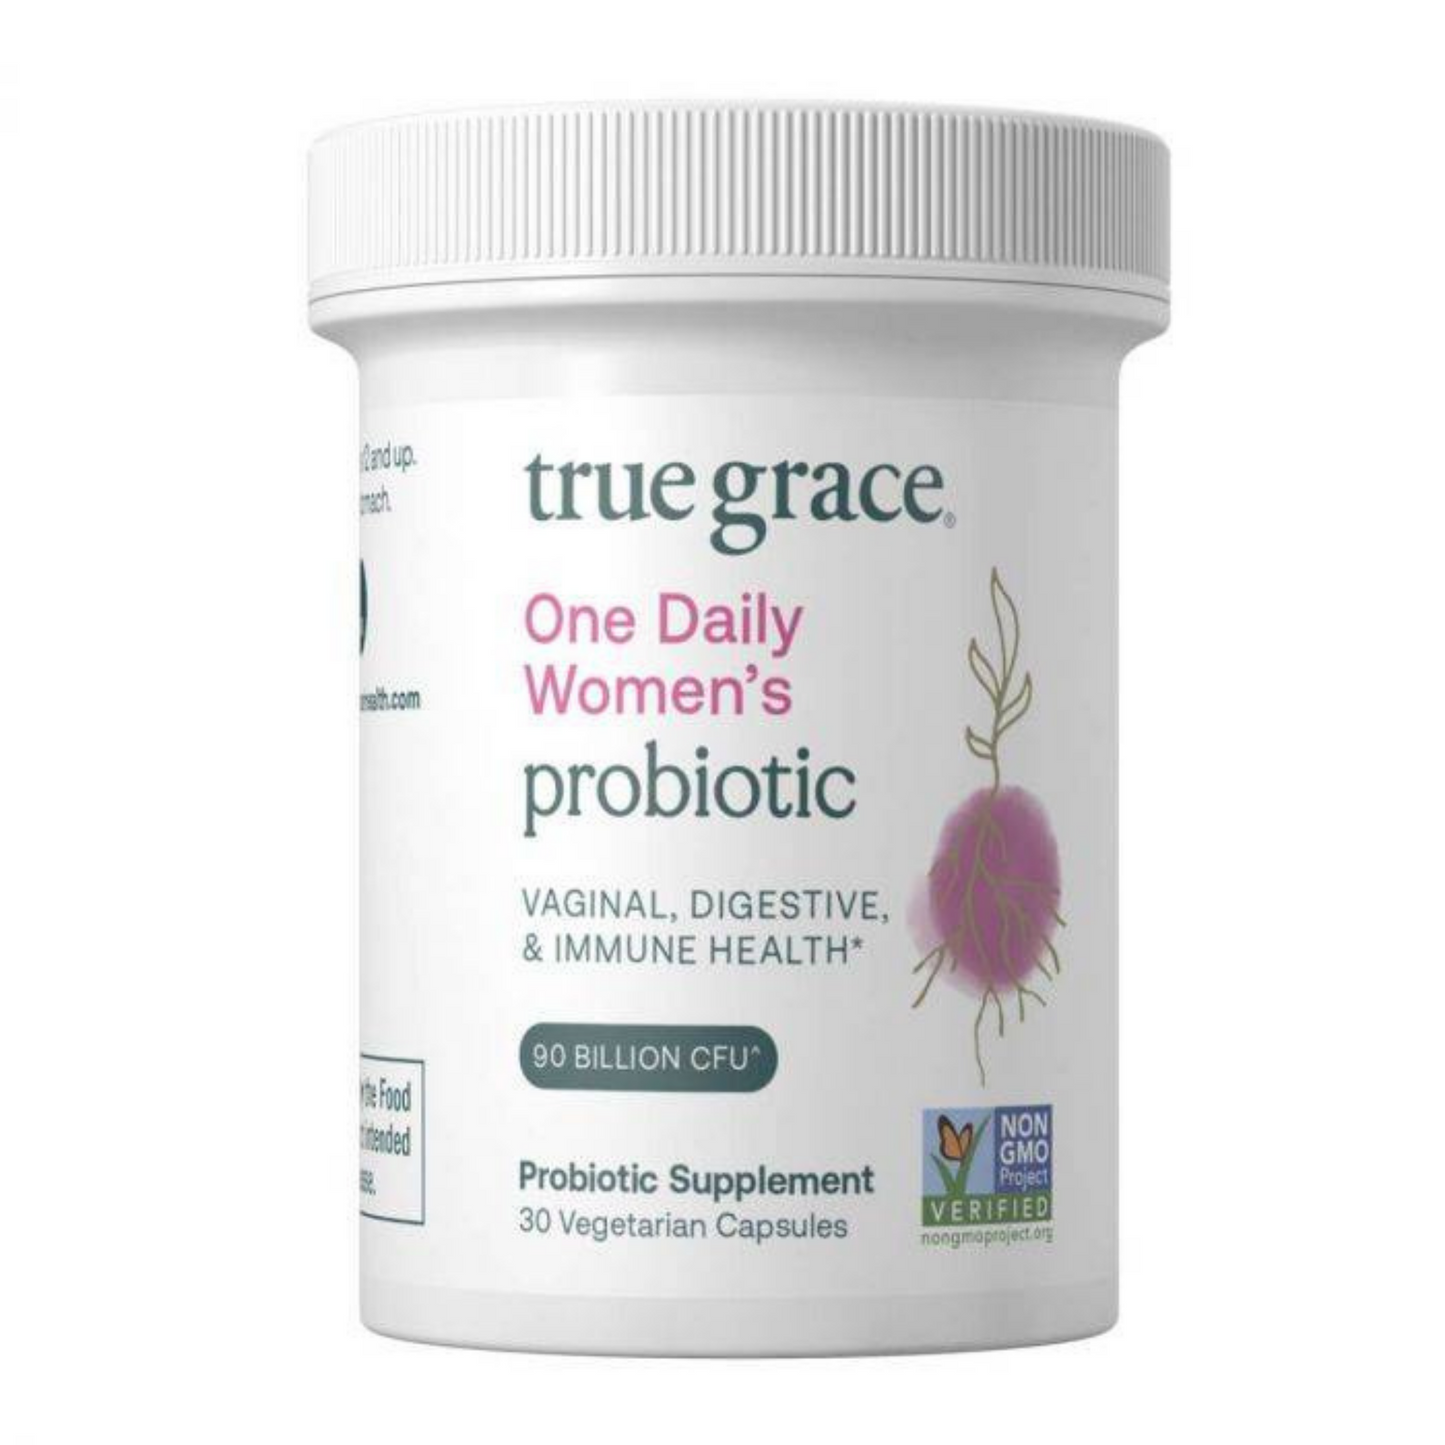 Primary Image of Women's One Daily Probiotic